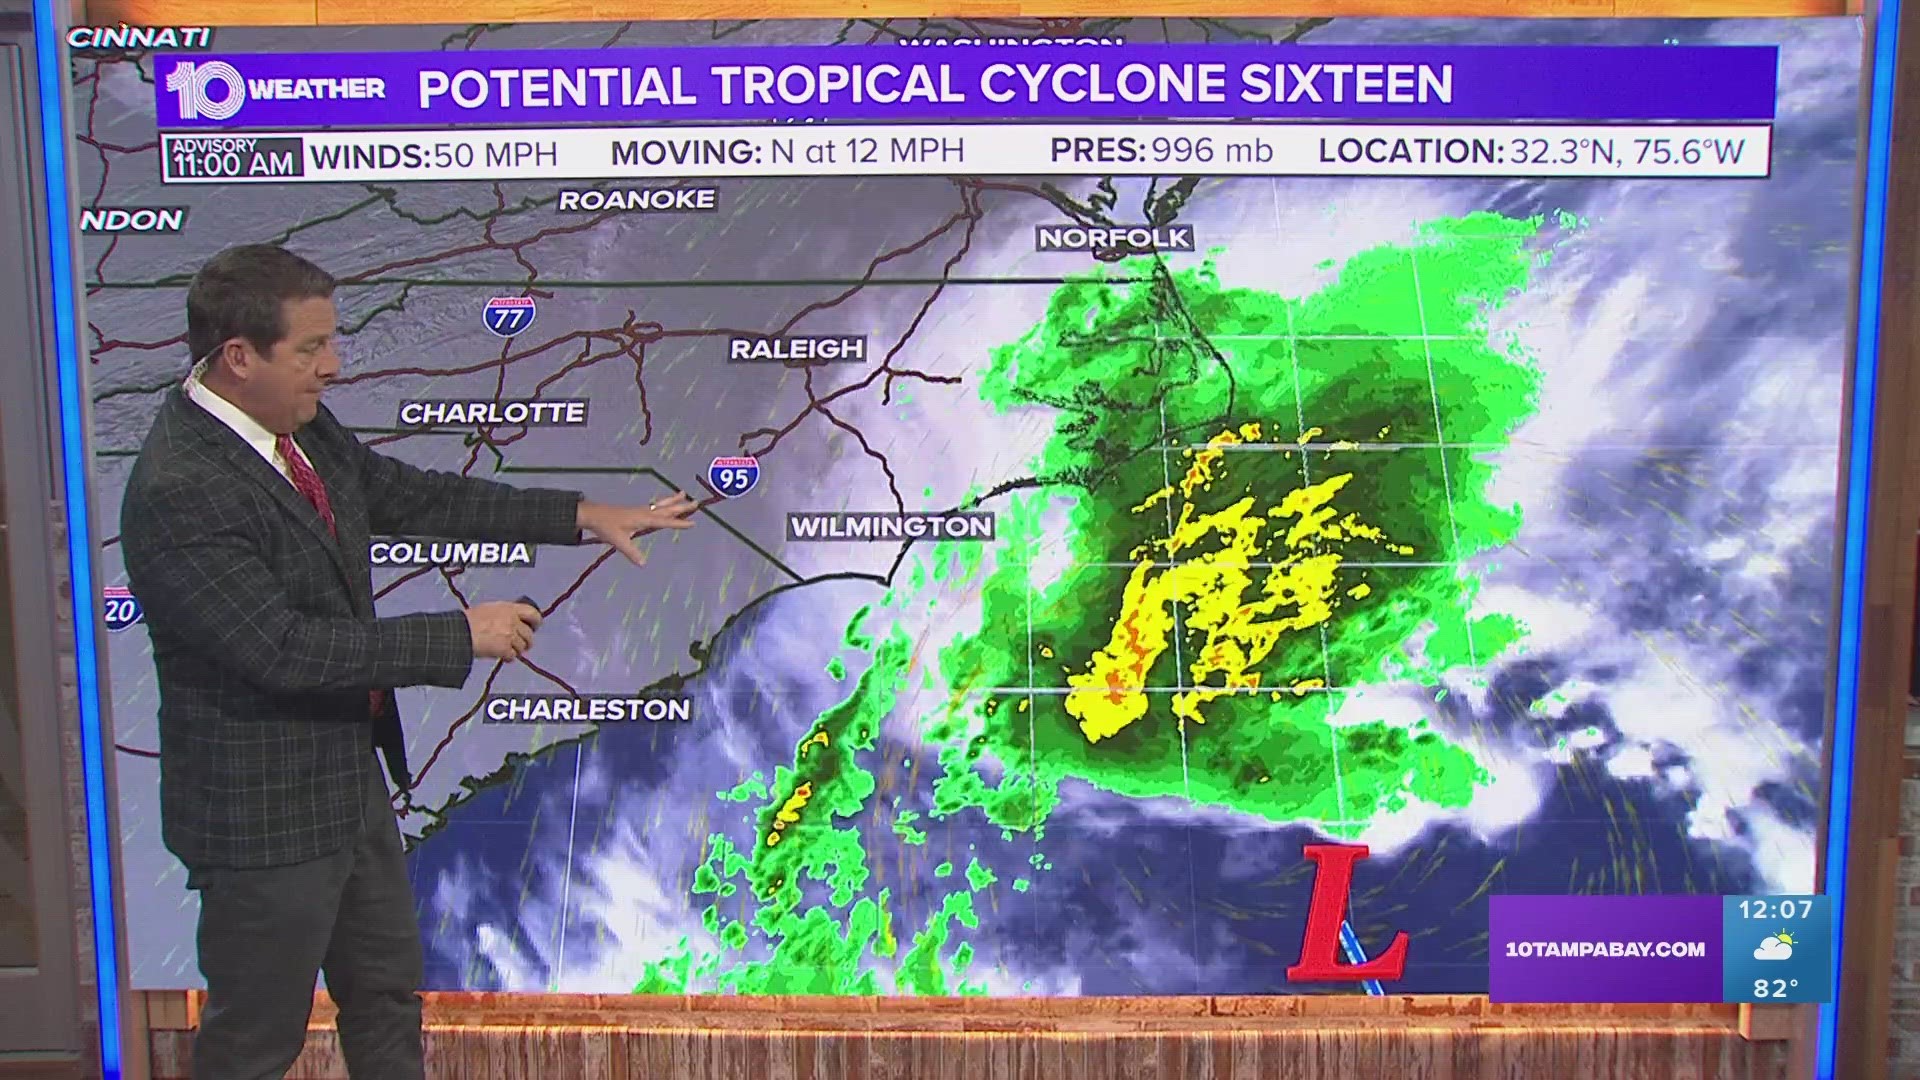 Tropical Storm Ophelia is forecast to develop from Potential Tropical Cyclone 16 before making landfall in North Carolina.